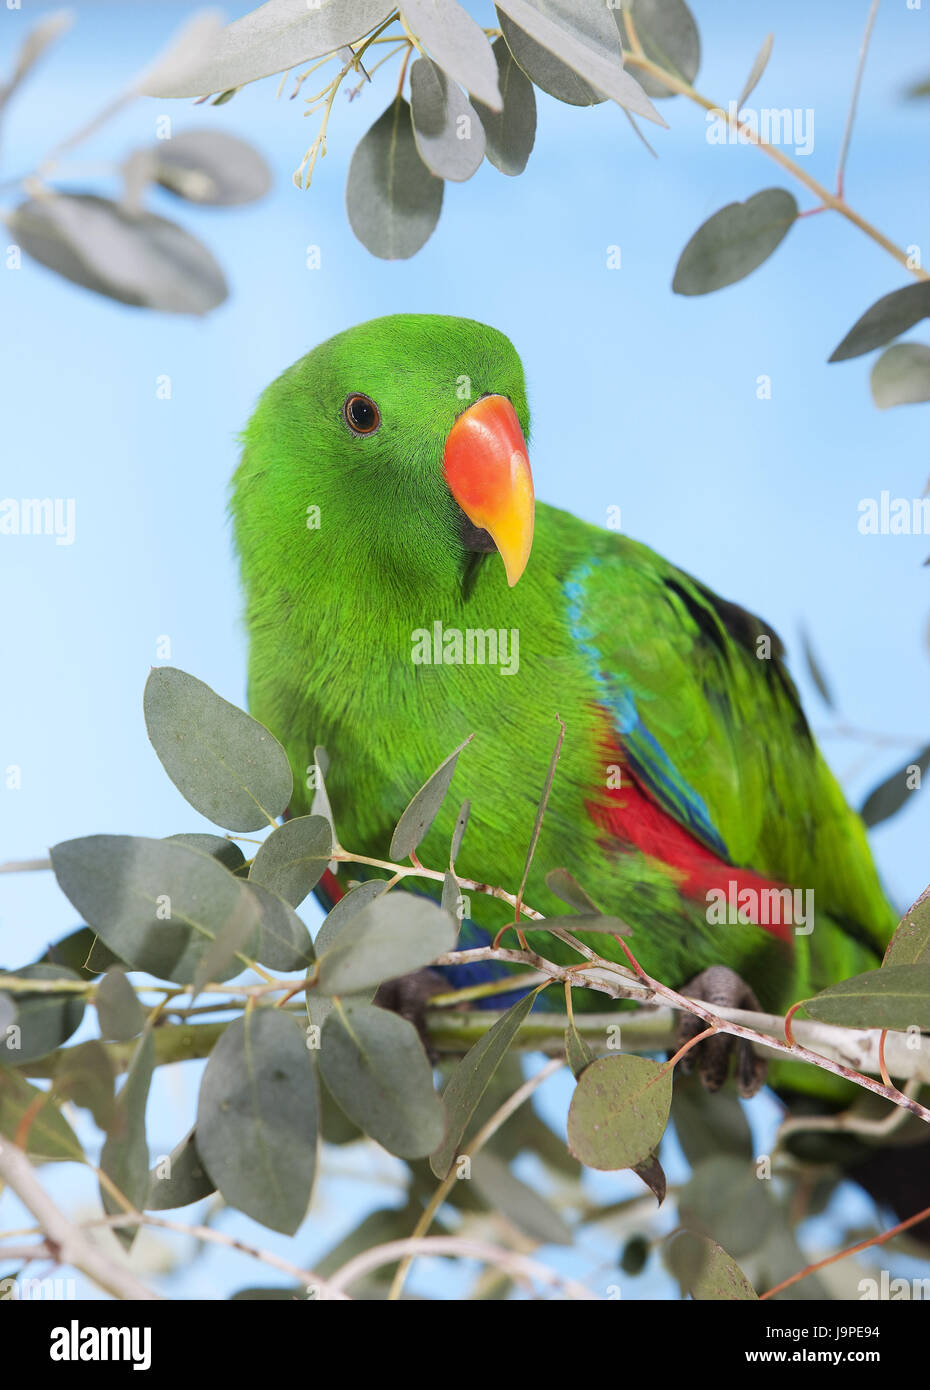 Noble parrot,Eclectus roratus,Manly,fork, Stock Photo